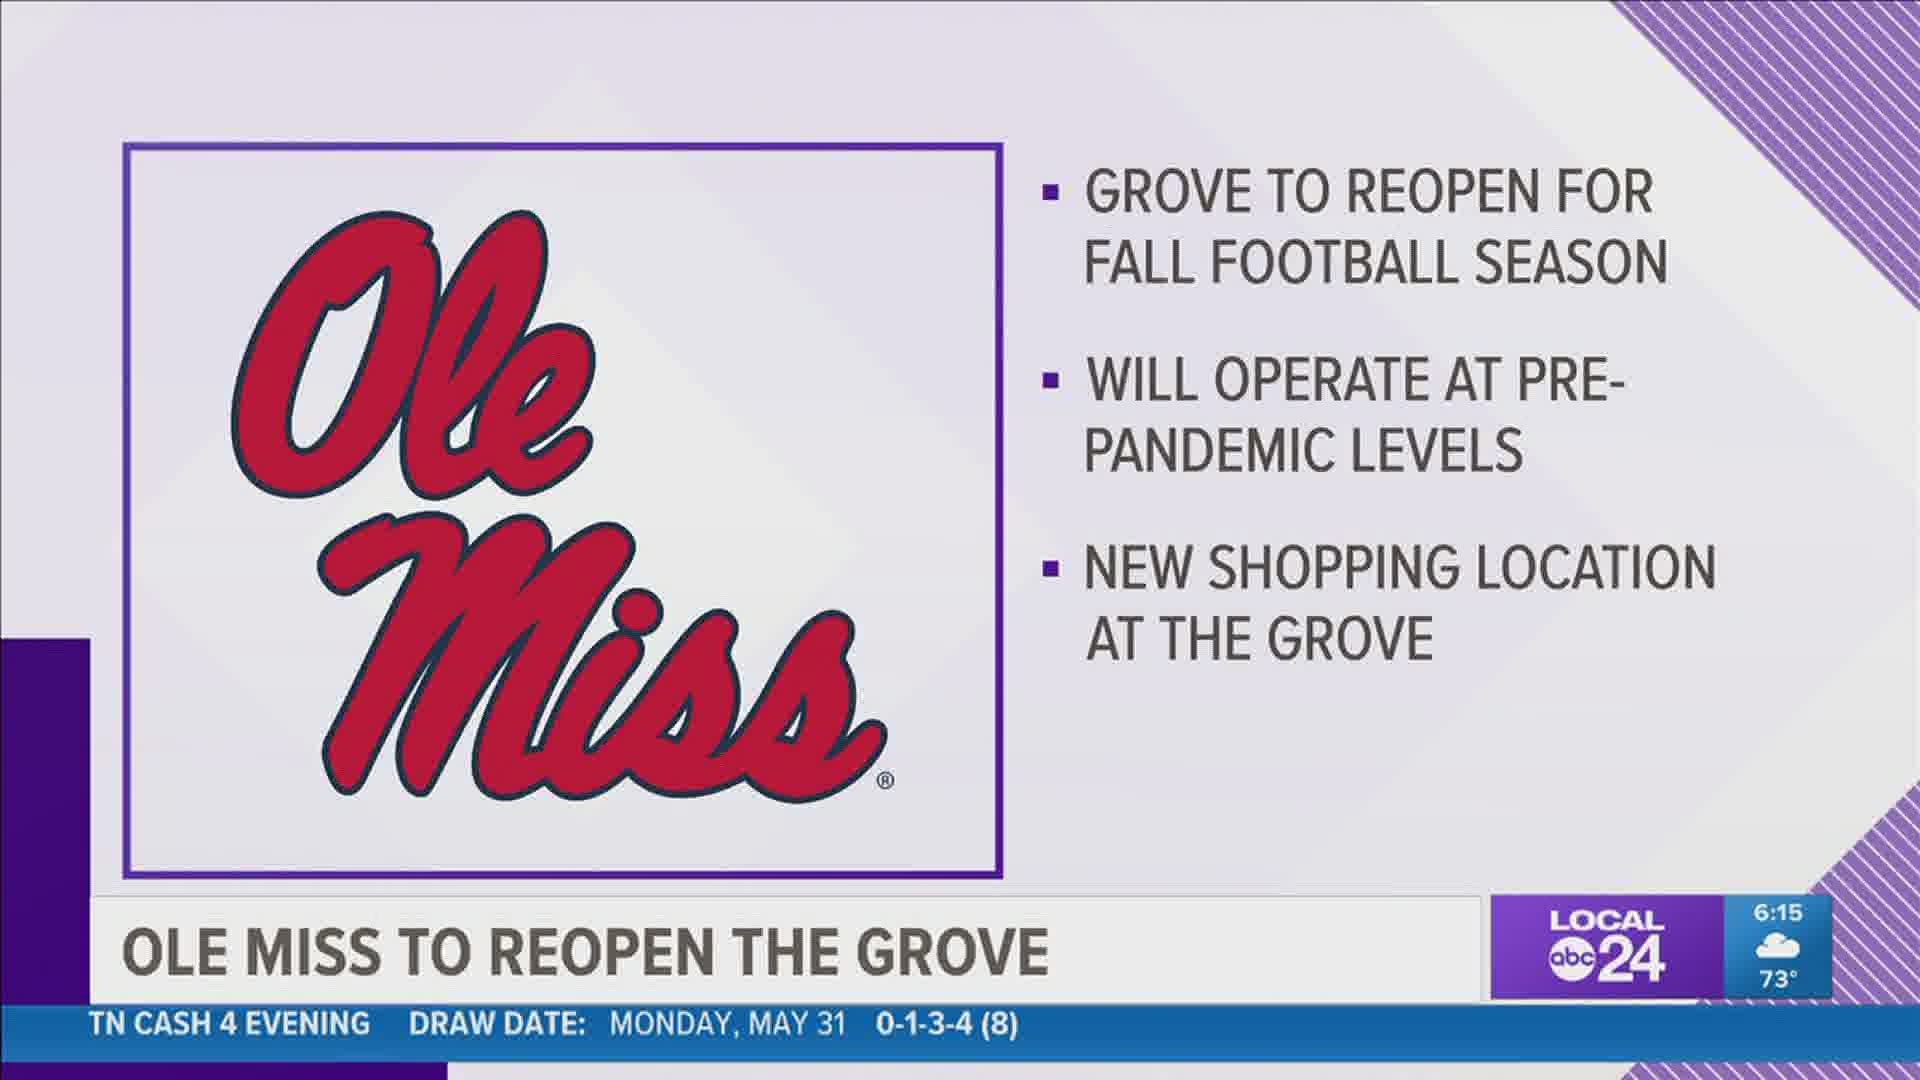 The Grove is expected to operate for Rebels tailgating as it did prior to the pandemic. Specific details will be announced closer to the season.